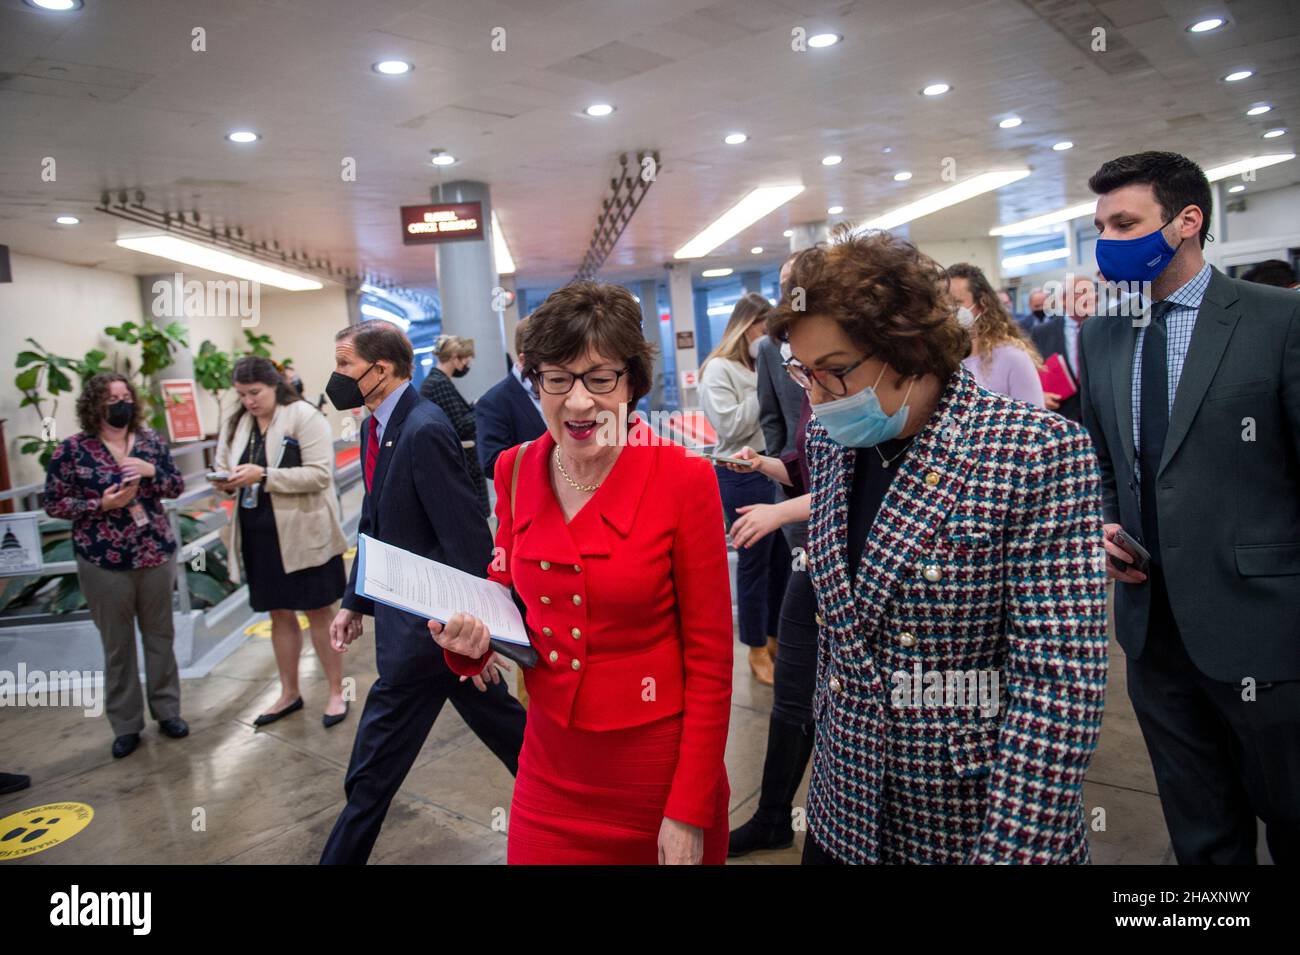 United States Senator Susan Collins (Republican of Maine), left, and United States Senator Jacky Rosen (Democrat of Nevada) make their way through the Senate subway during a vote at the US Capitol in Washington, DC, Wednesday, December 15, 2021. Credit: Rod Lamkey/CNP /MediaPunch Stock Photo